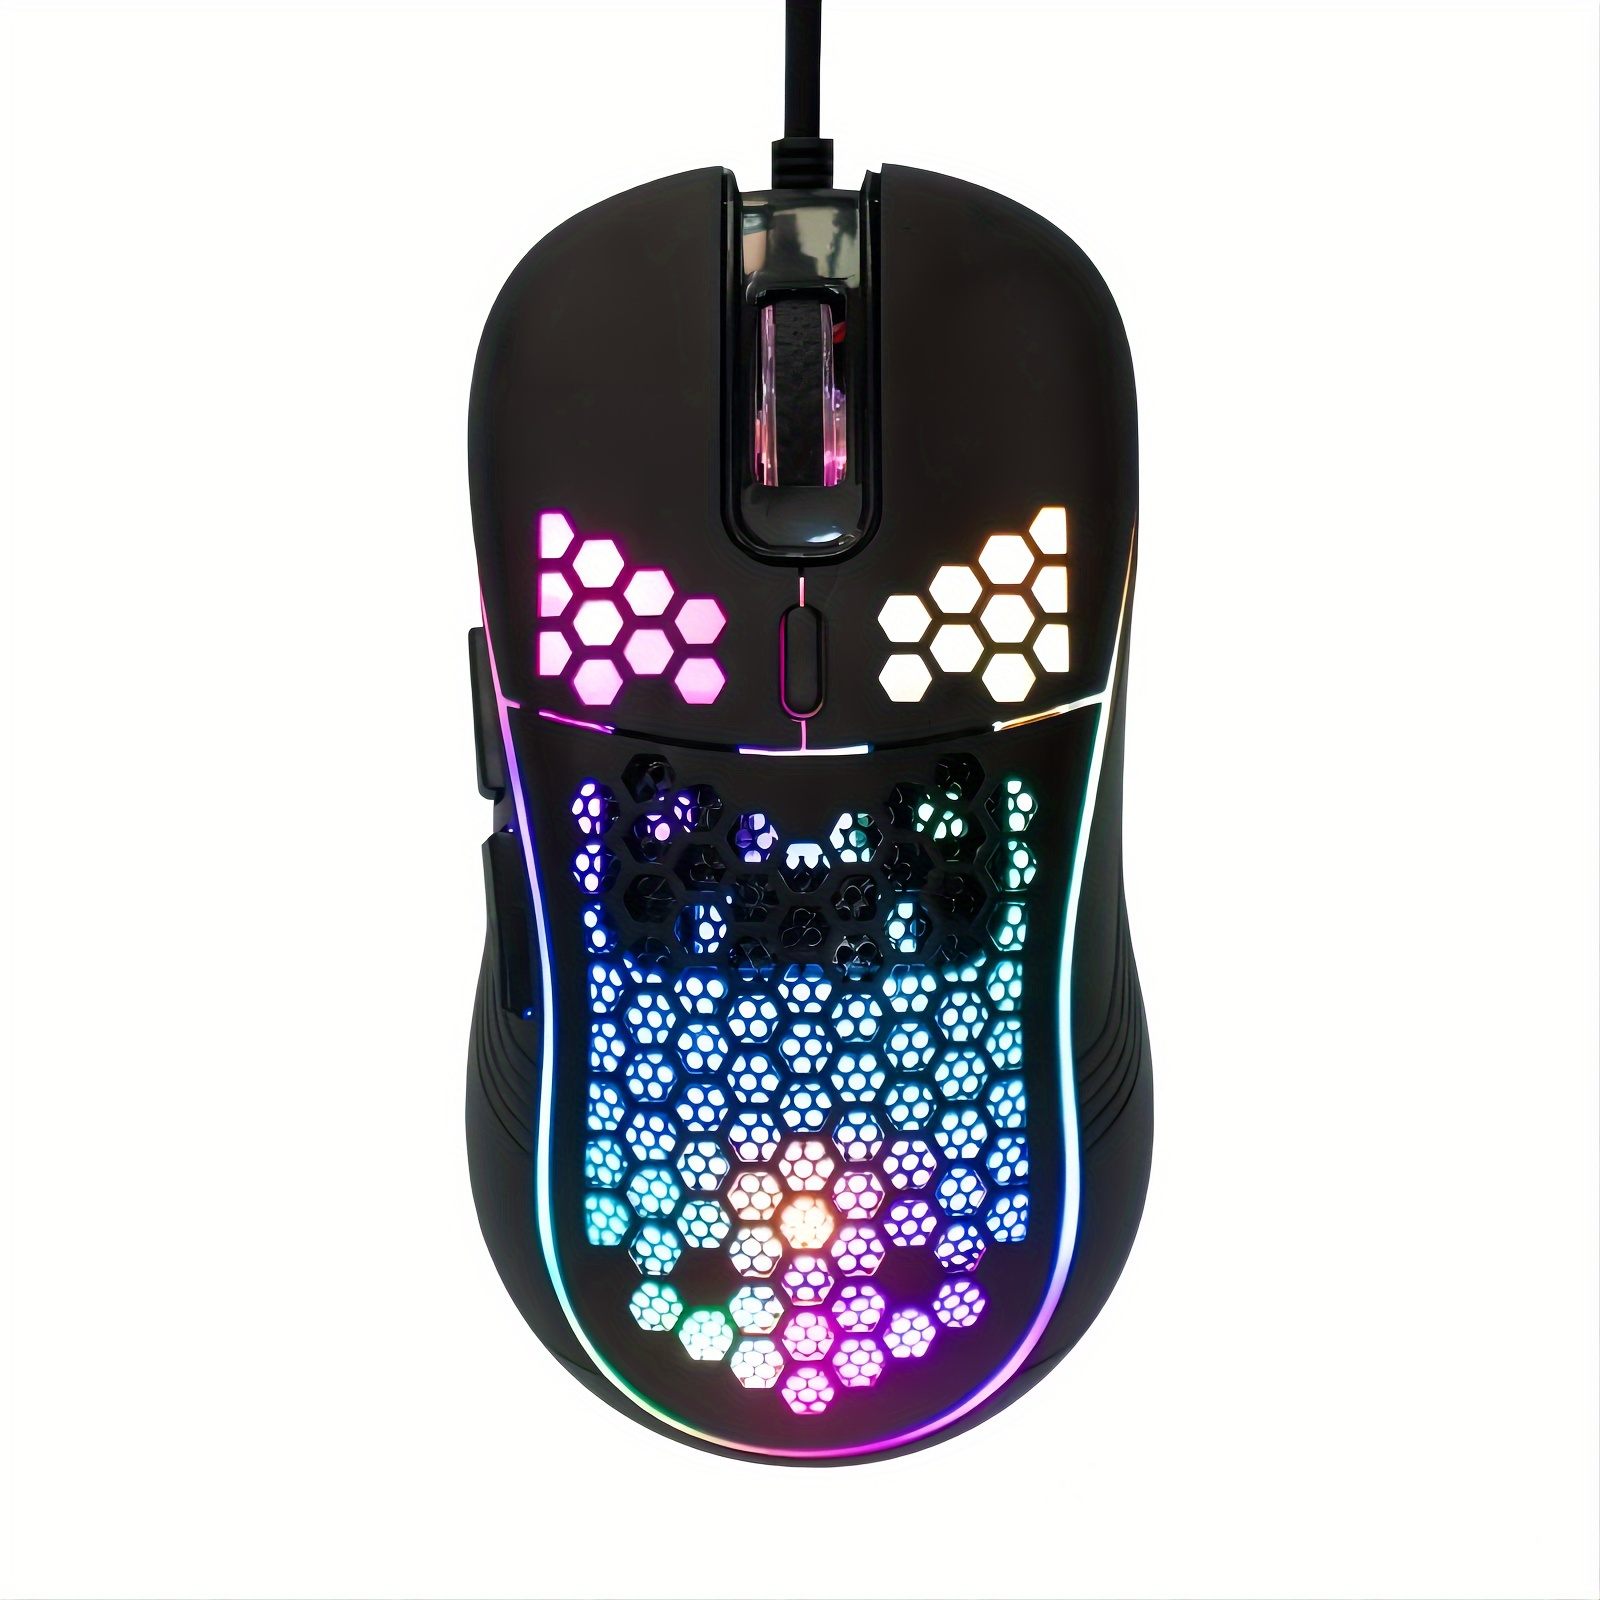 

Wired Illuminated Gaming Mouse With Optical Sensor For Windows 7 - Ergonomic Design, Durable Plastic